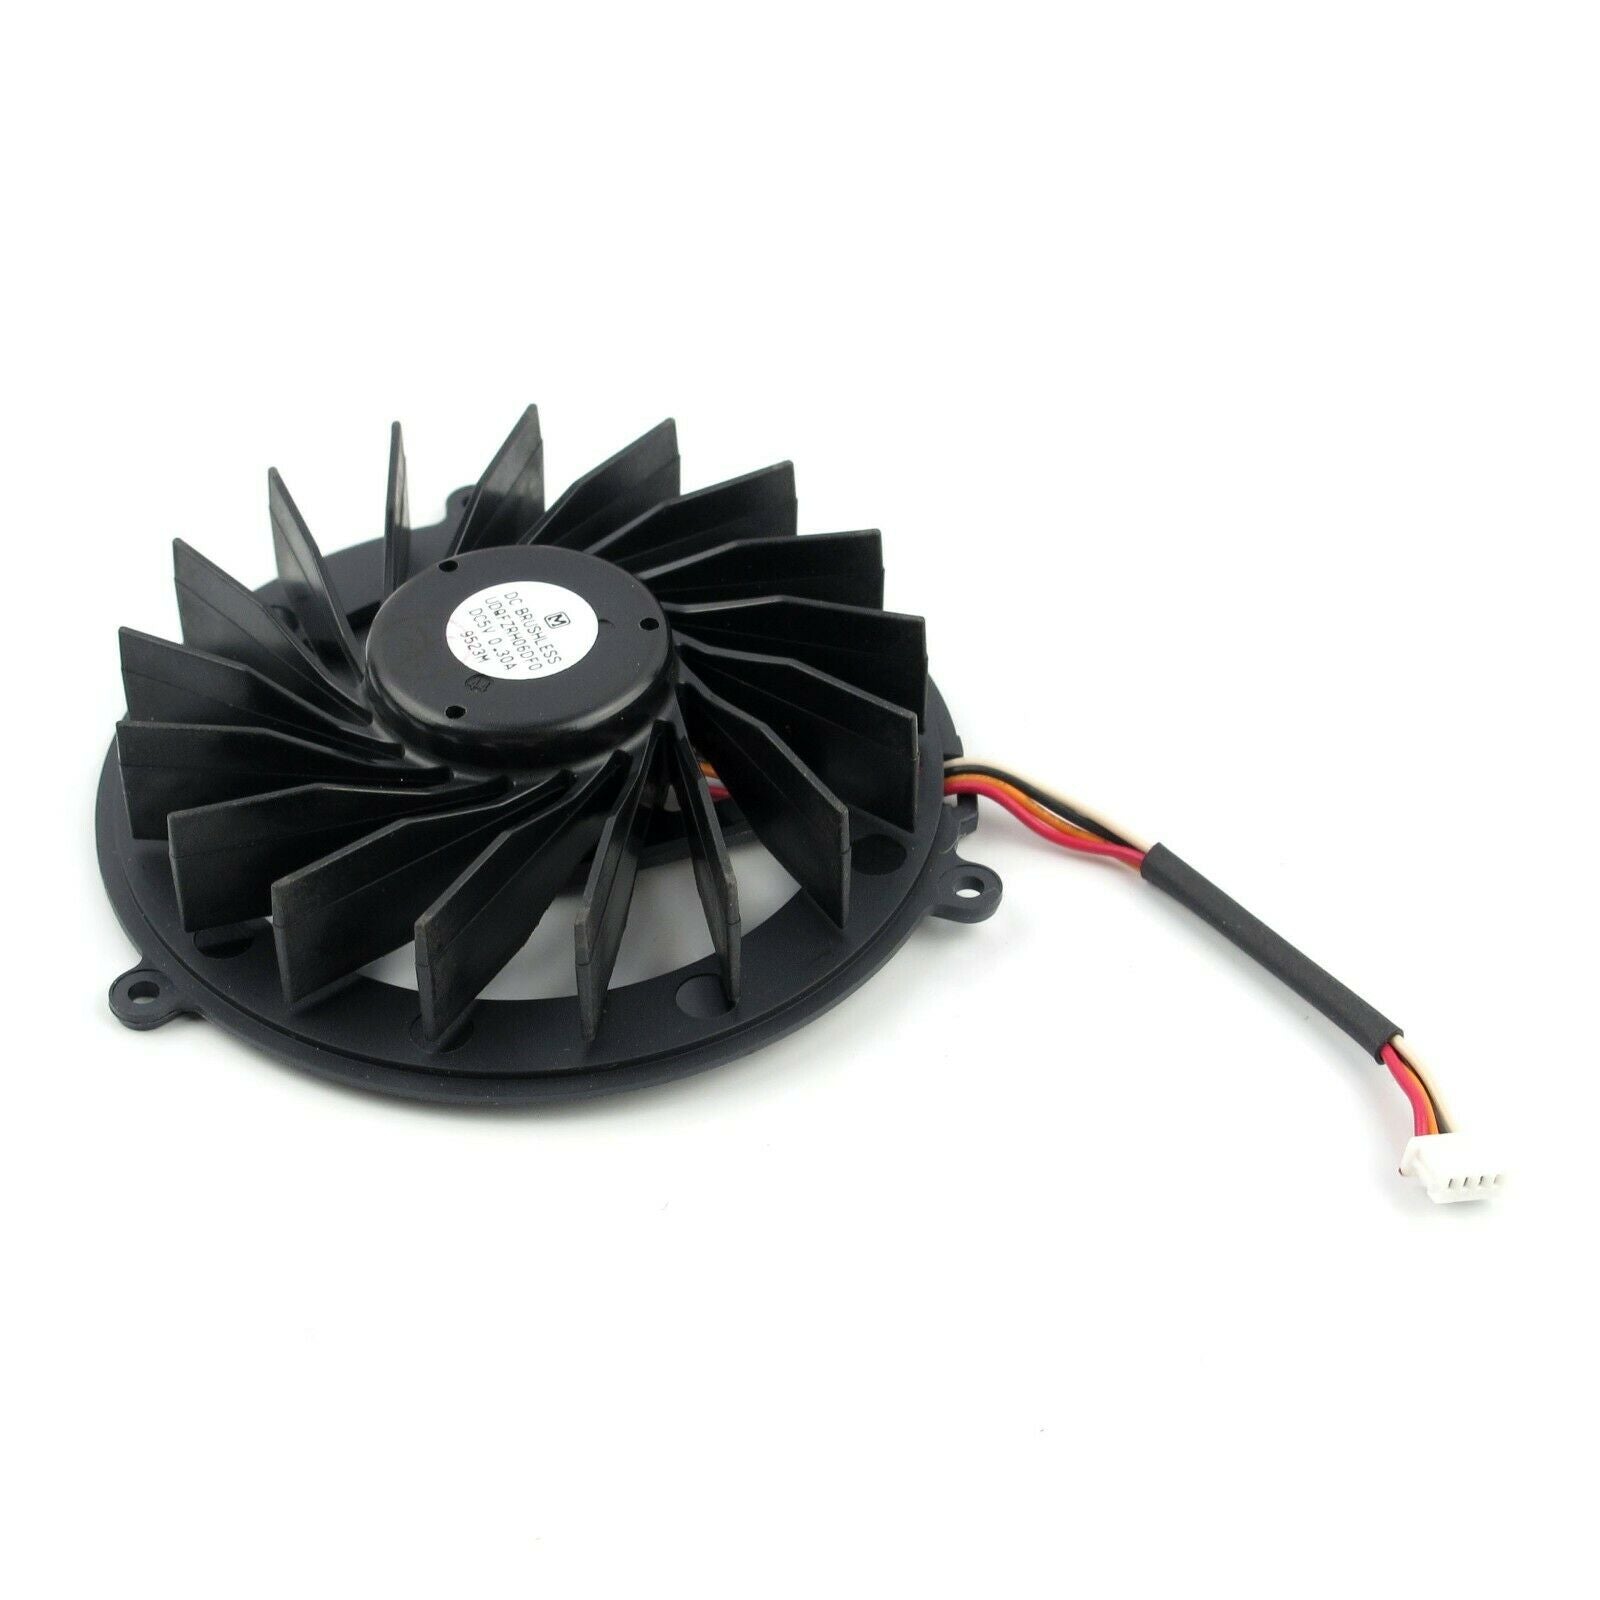 Sony UDQFZRH05DF0 New CPU Cooling Thermal Fan VAIO VGC-JS VPC-L UDQFZRH06DF0 UDQF2RH53DF0 UDQF2RH55DF0